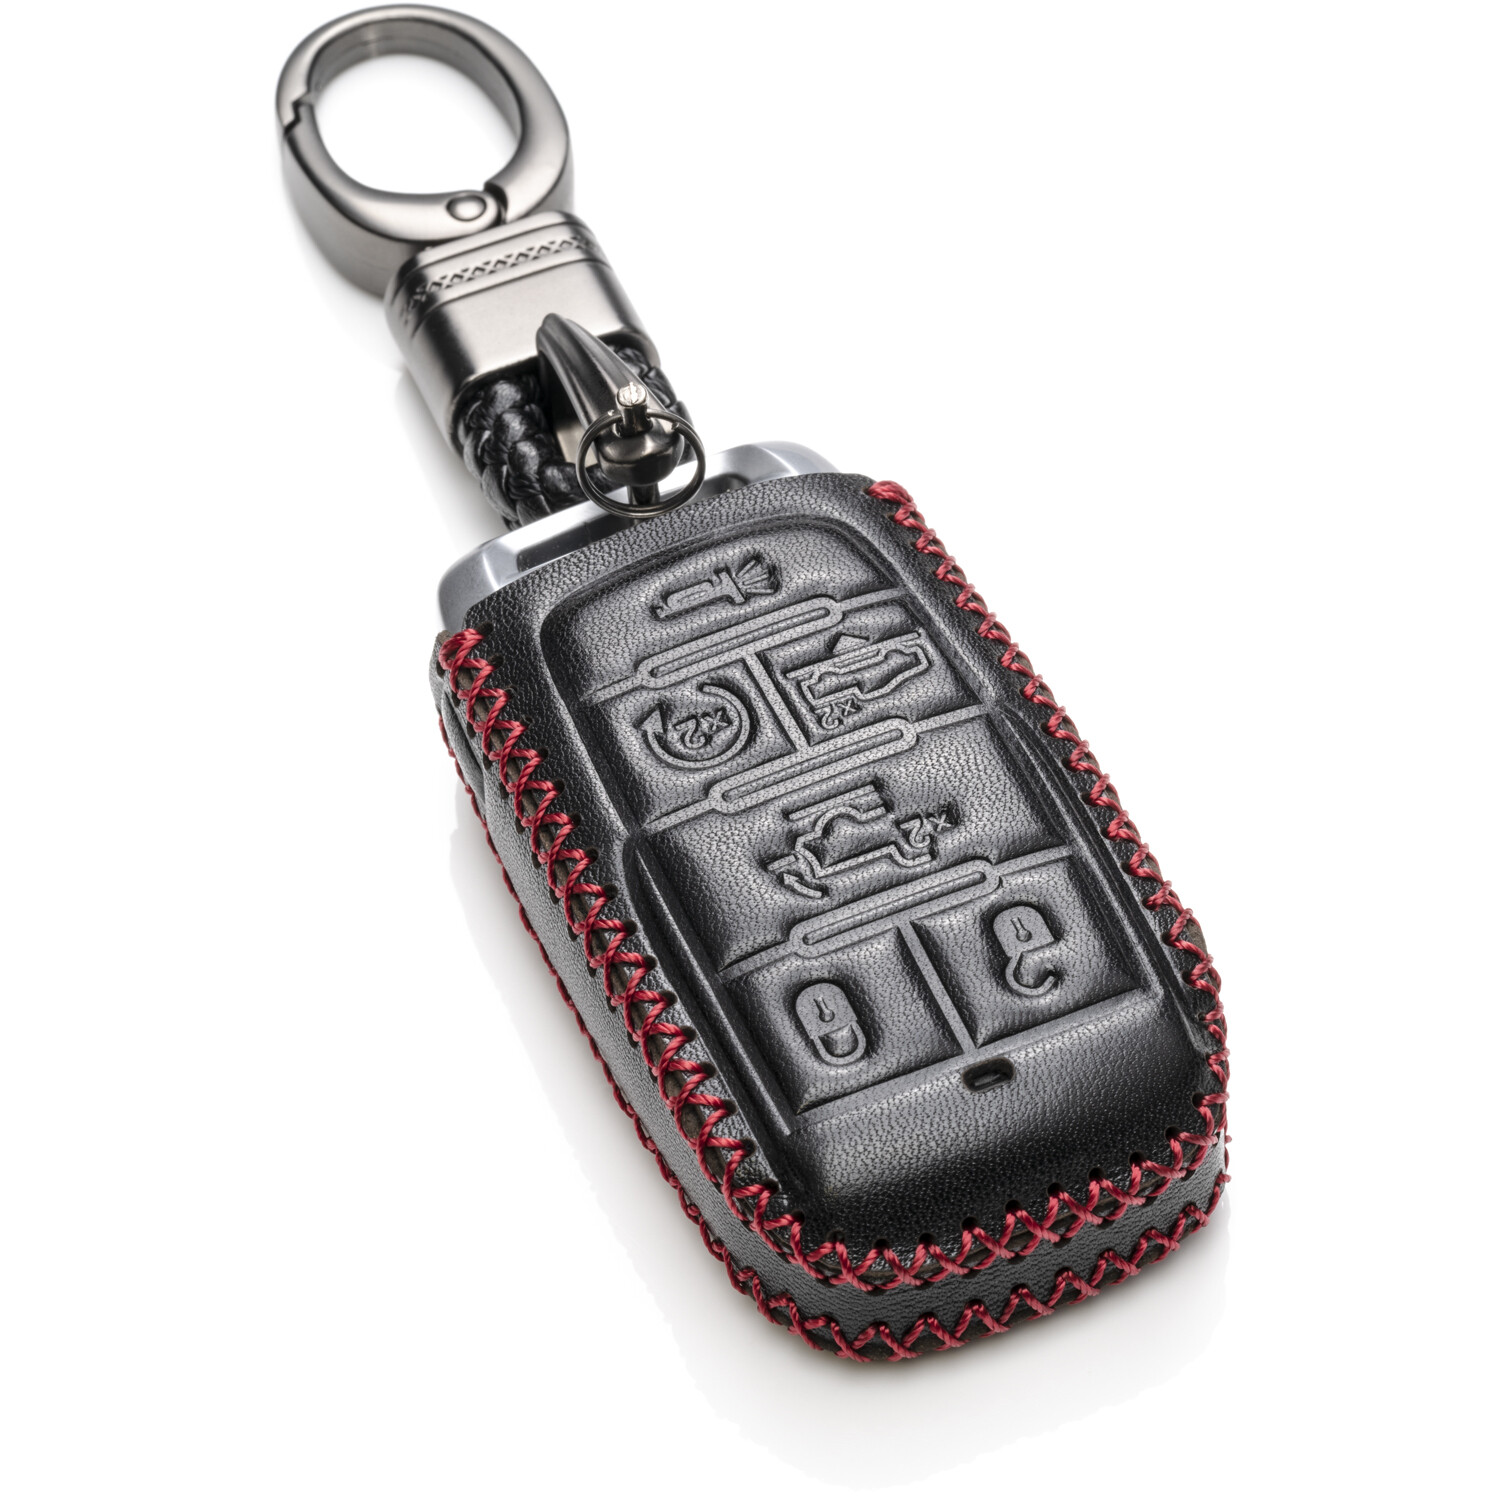 4 Buttons, Red Vitodeco Genuine Leather Smart Key Keyless Remote Entry Fob Case Cover with Leather Key Chain for BMW 1 2 5 7 M Series X1 X4 X5 X6